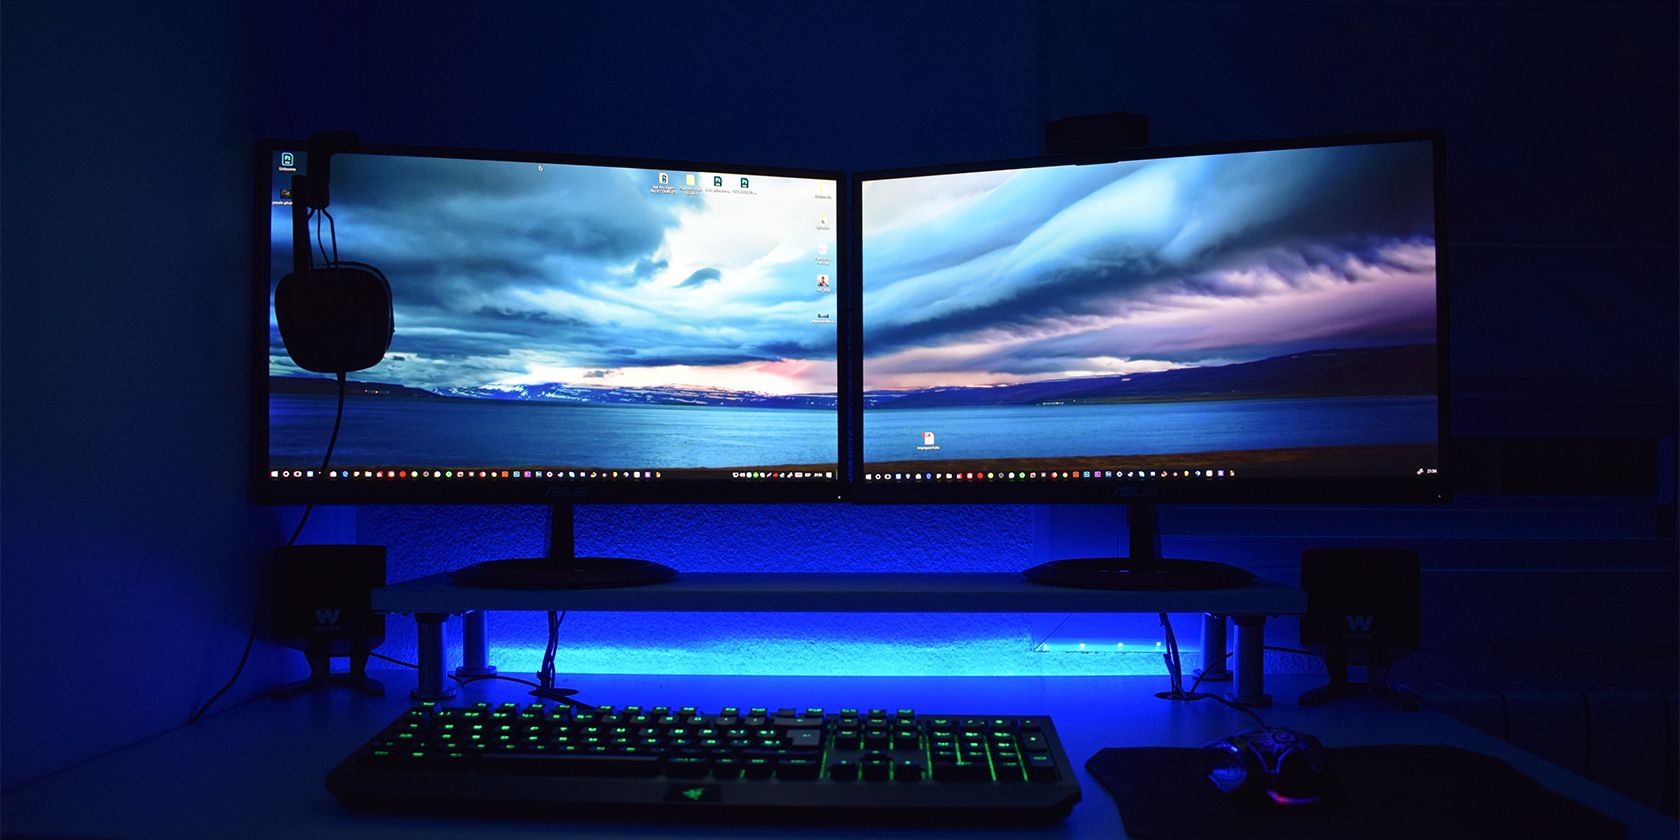 Two monitors on a desk